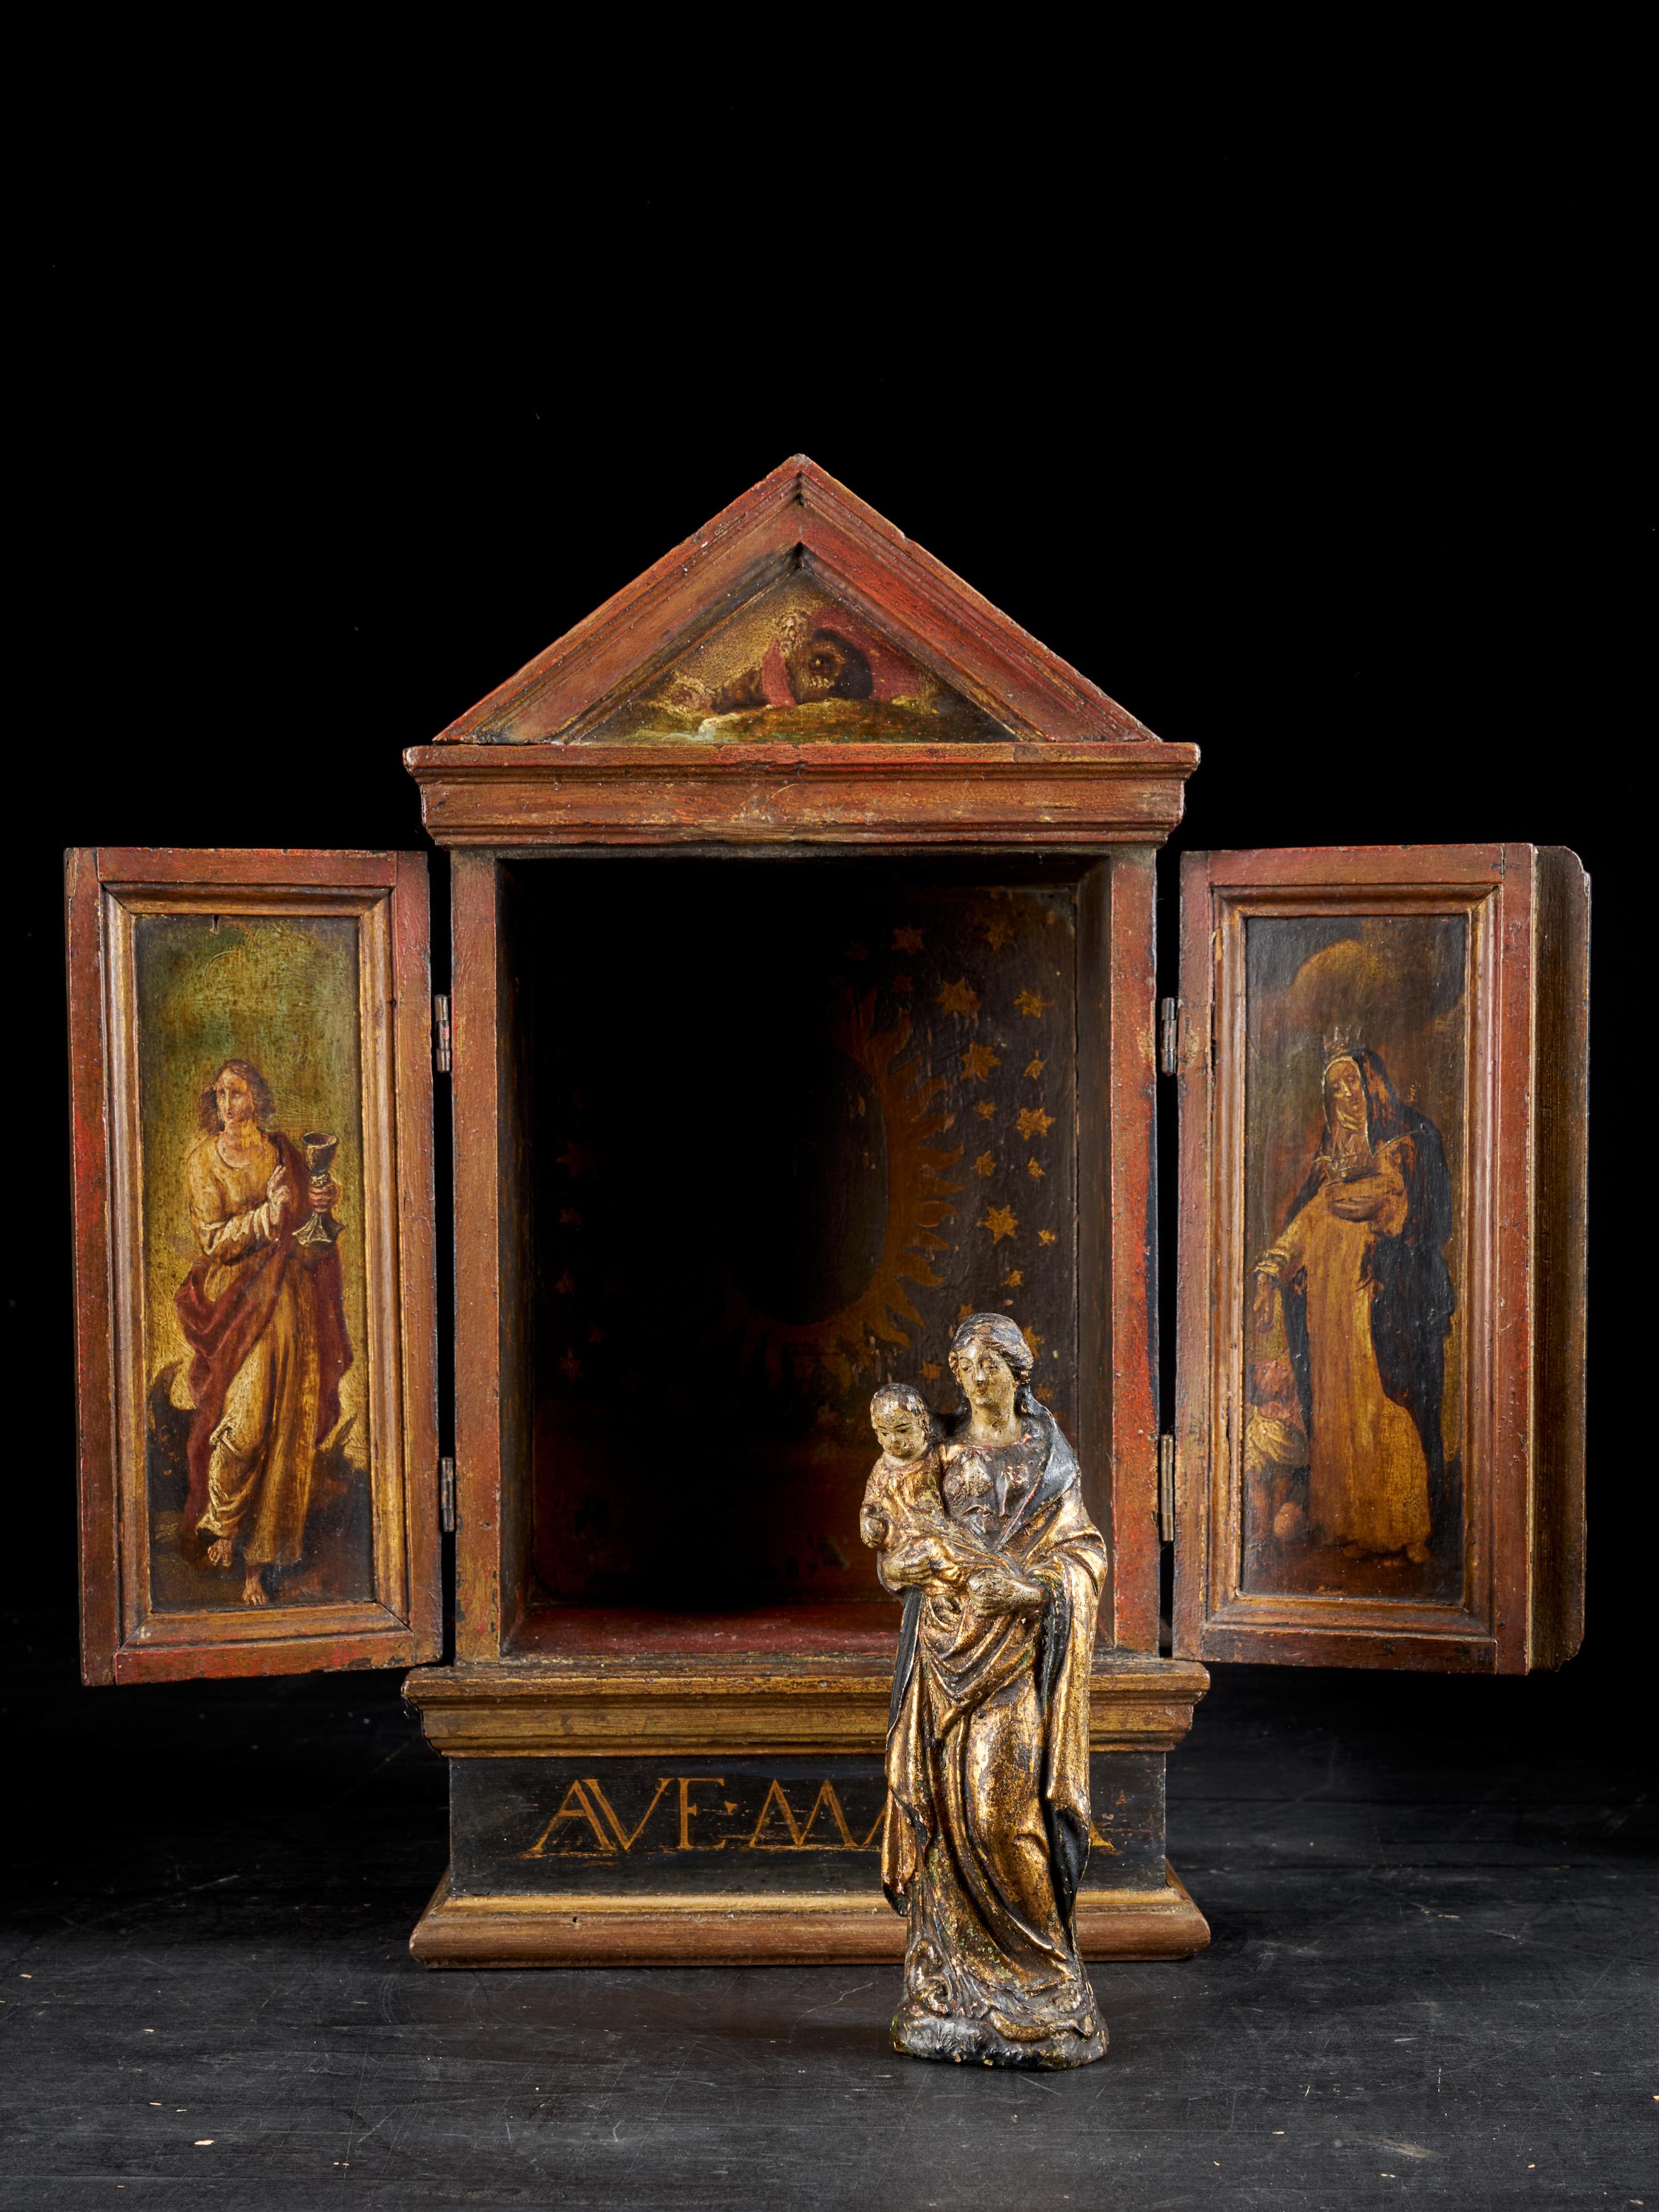 The 18th century terracotta statue is probably from the area of Mechelen. It has been placed in a very nice 19th century wooden cabinet with painted doors.